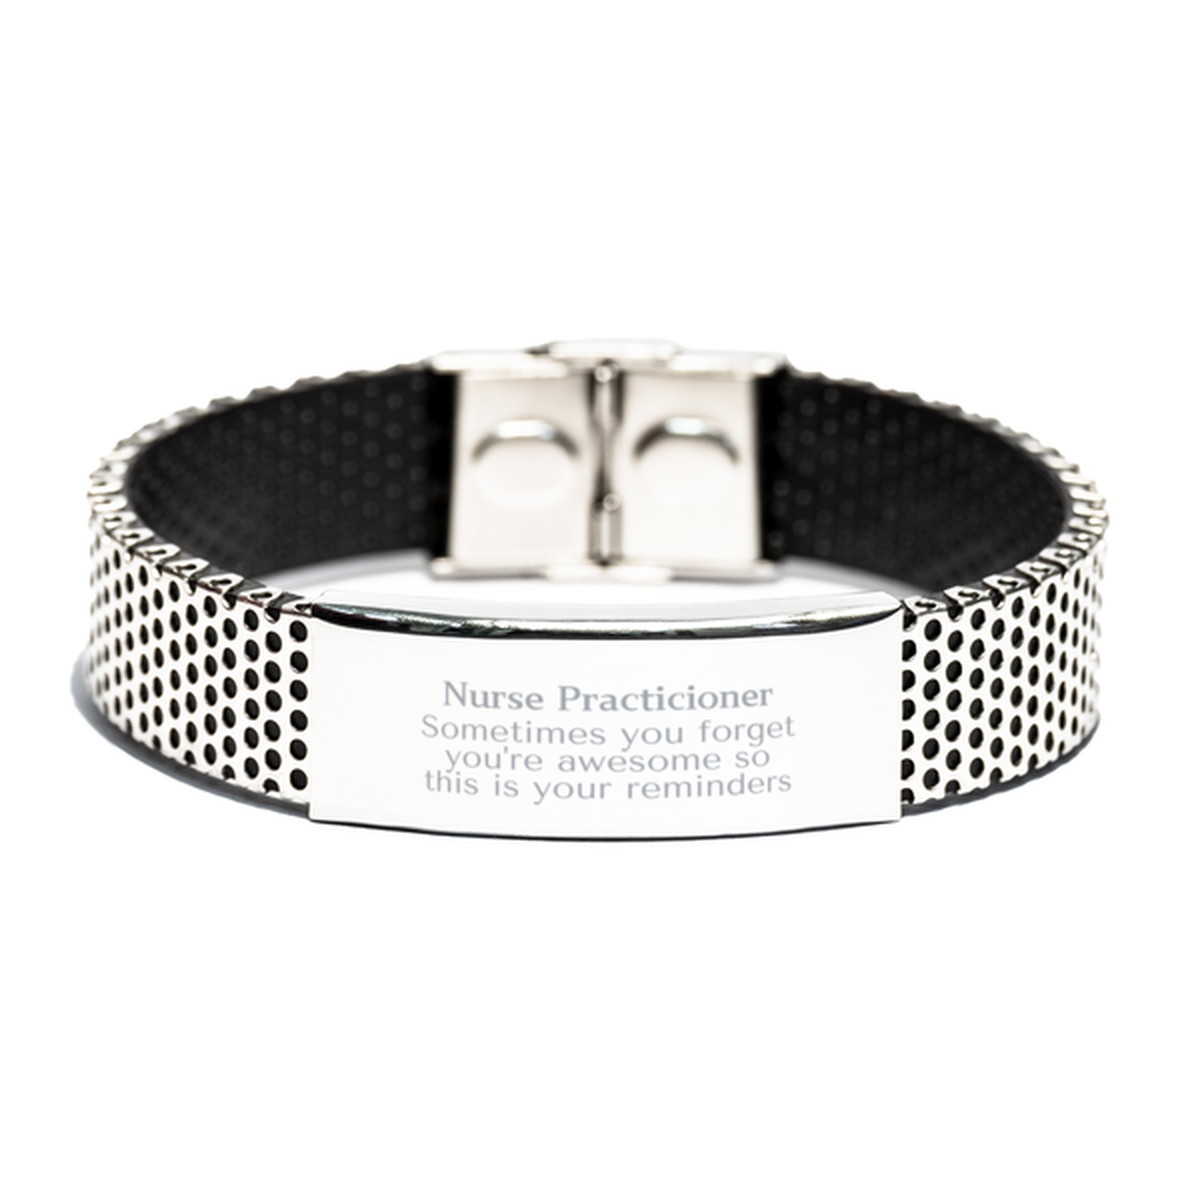 Sentimental Nurse Practicioner Stainless Steel Bracelet, Nurse Practicioner Sometimes you forget you're awesome so this is your reminders, Graduation Christmas Birthday Gifts for Nurse Practicioner, Men, Women, Coworkers